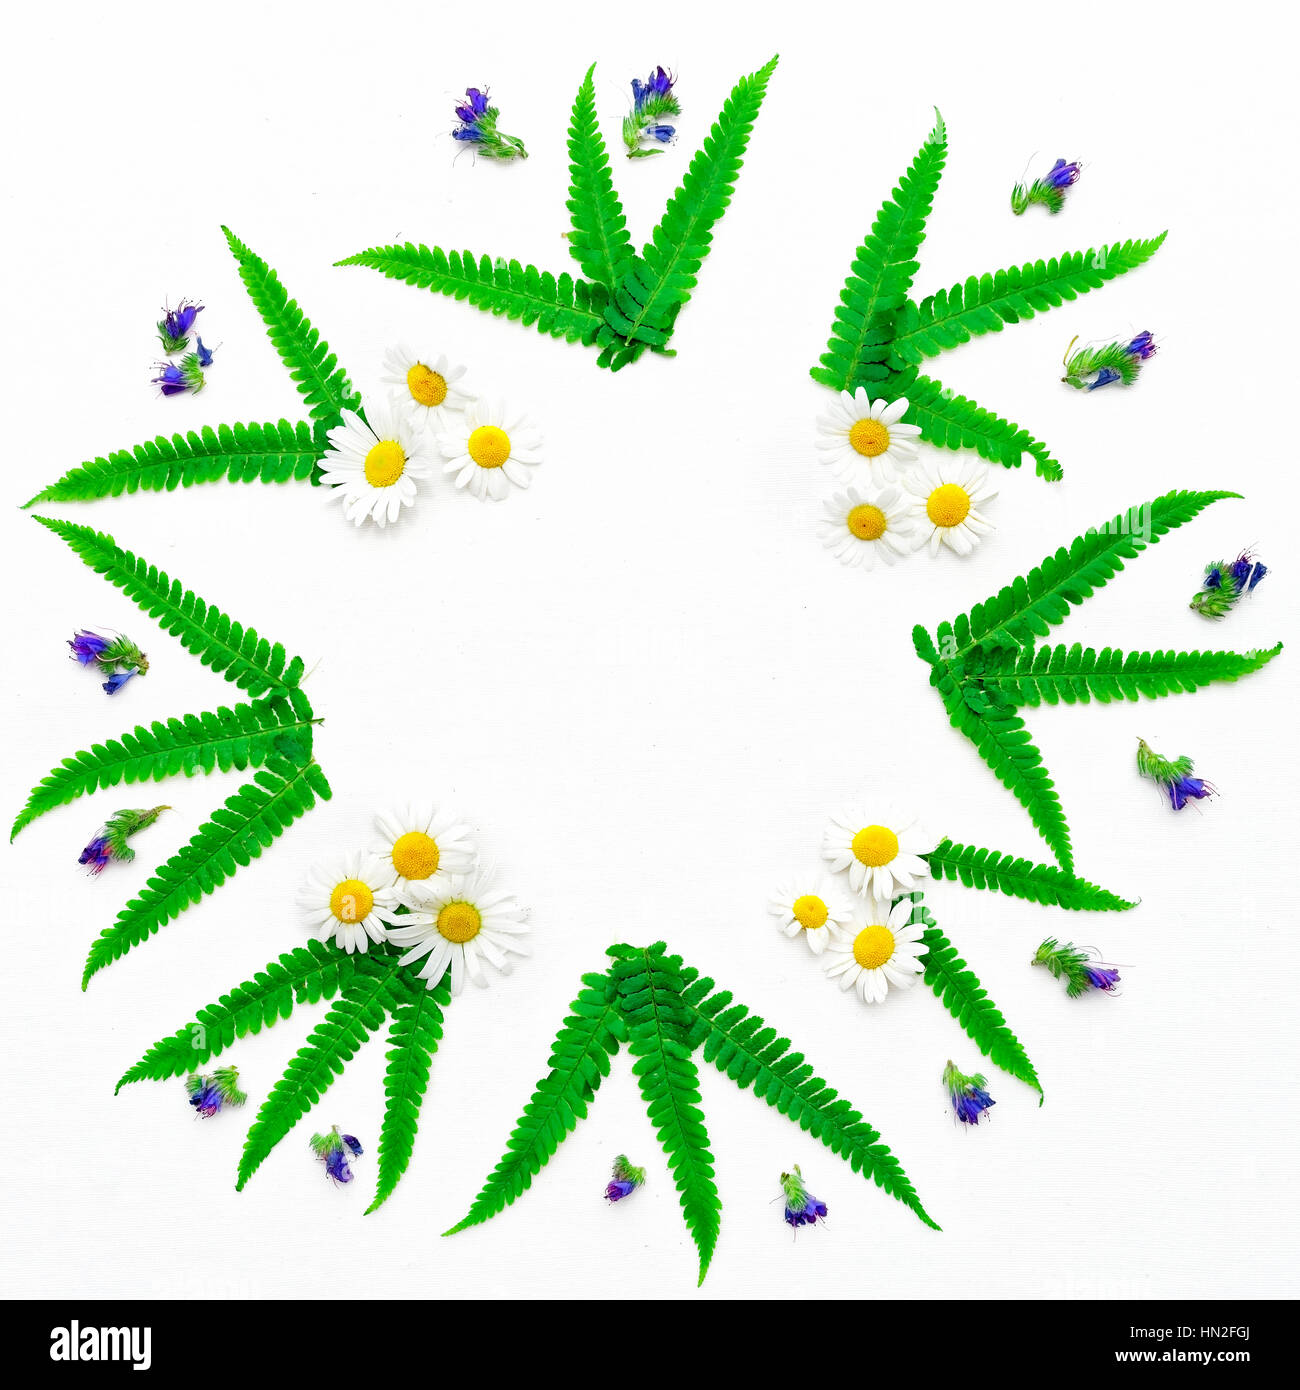 Wreath of chamomile, purple wild flowers and leaves of green fern on white background. Flat lay. Stock Photo